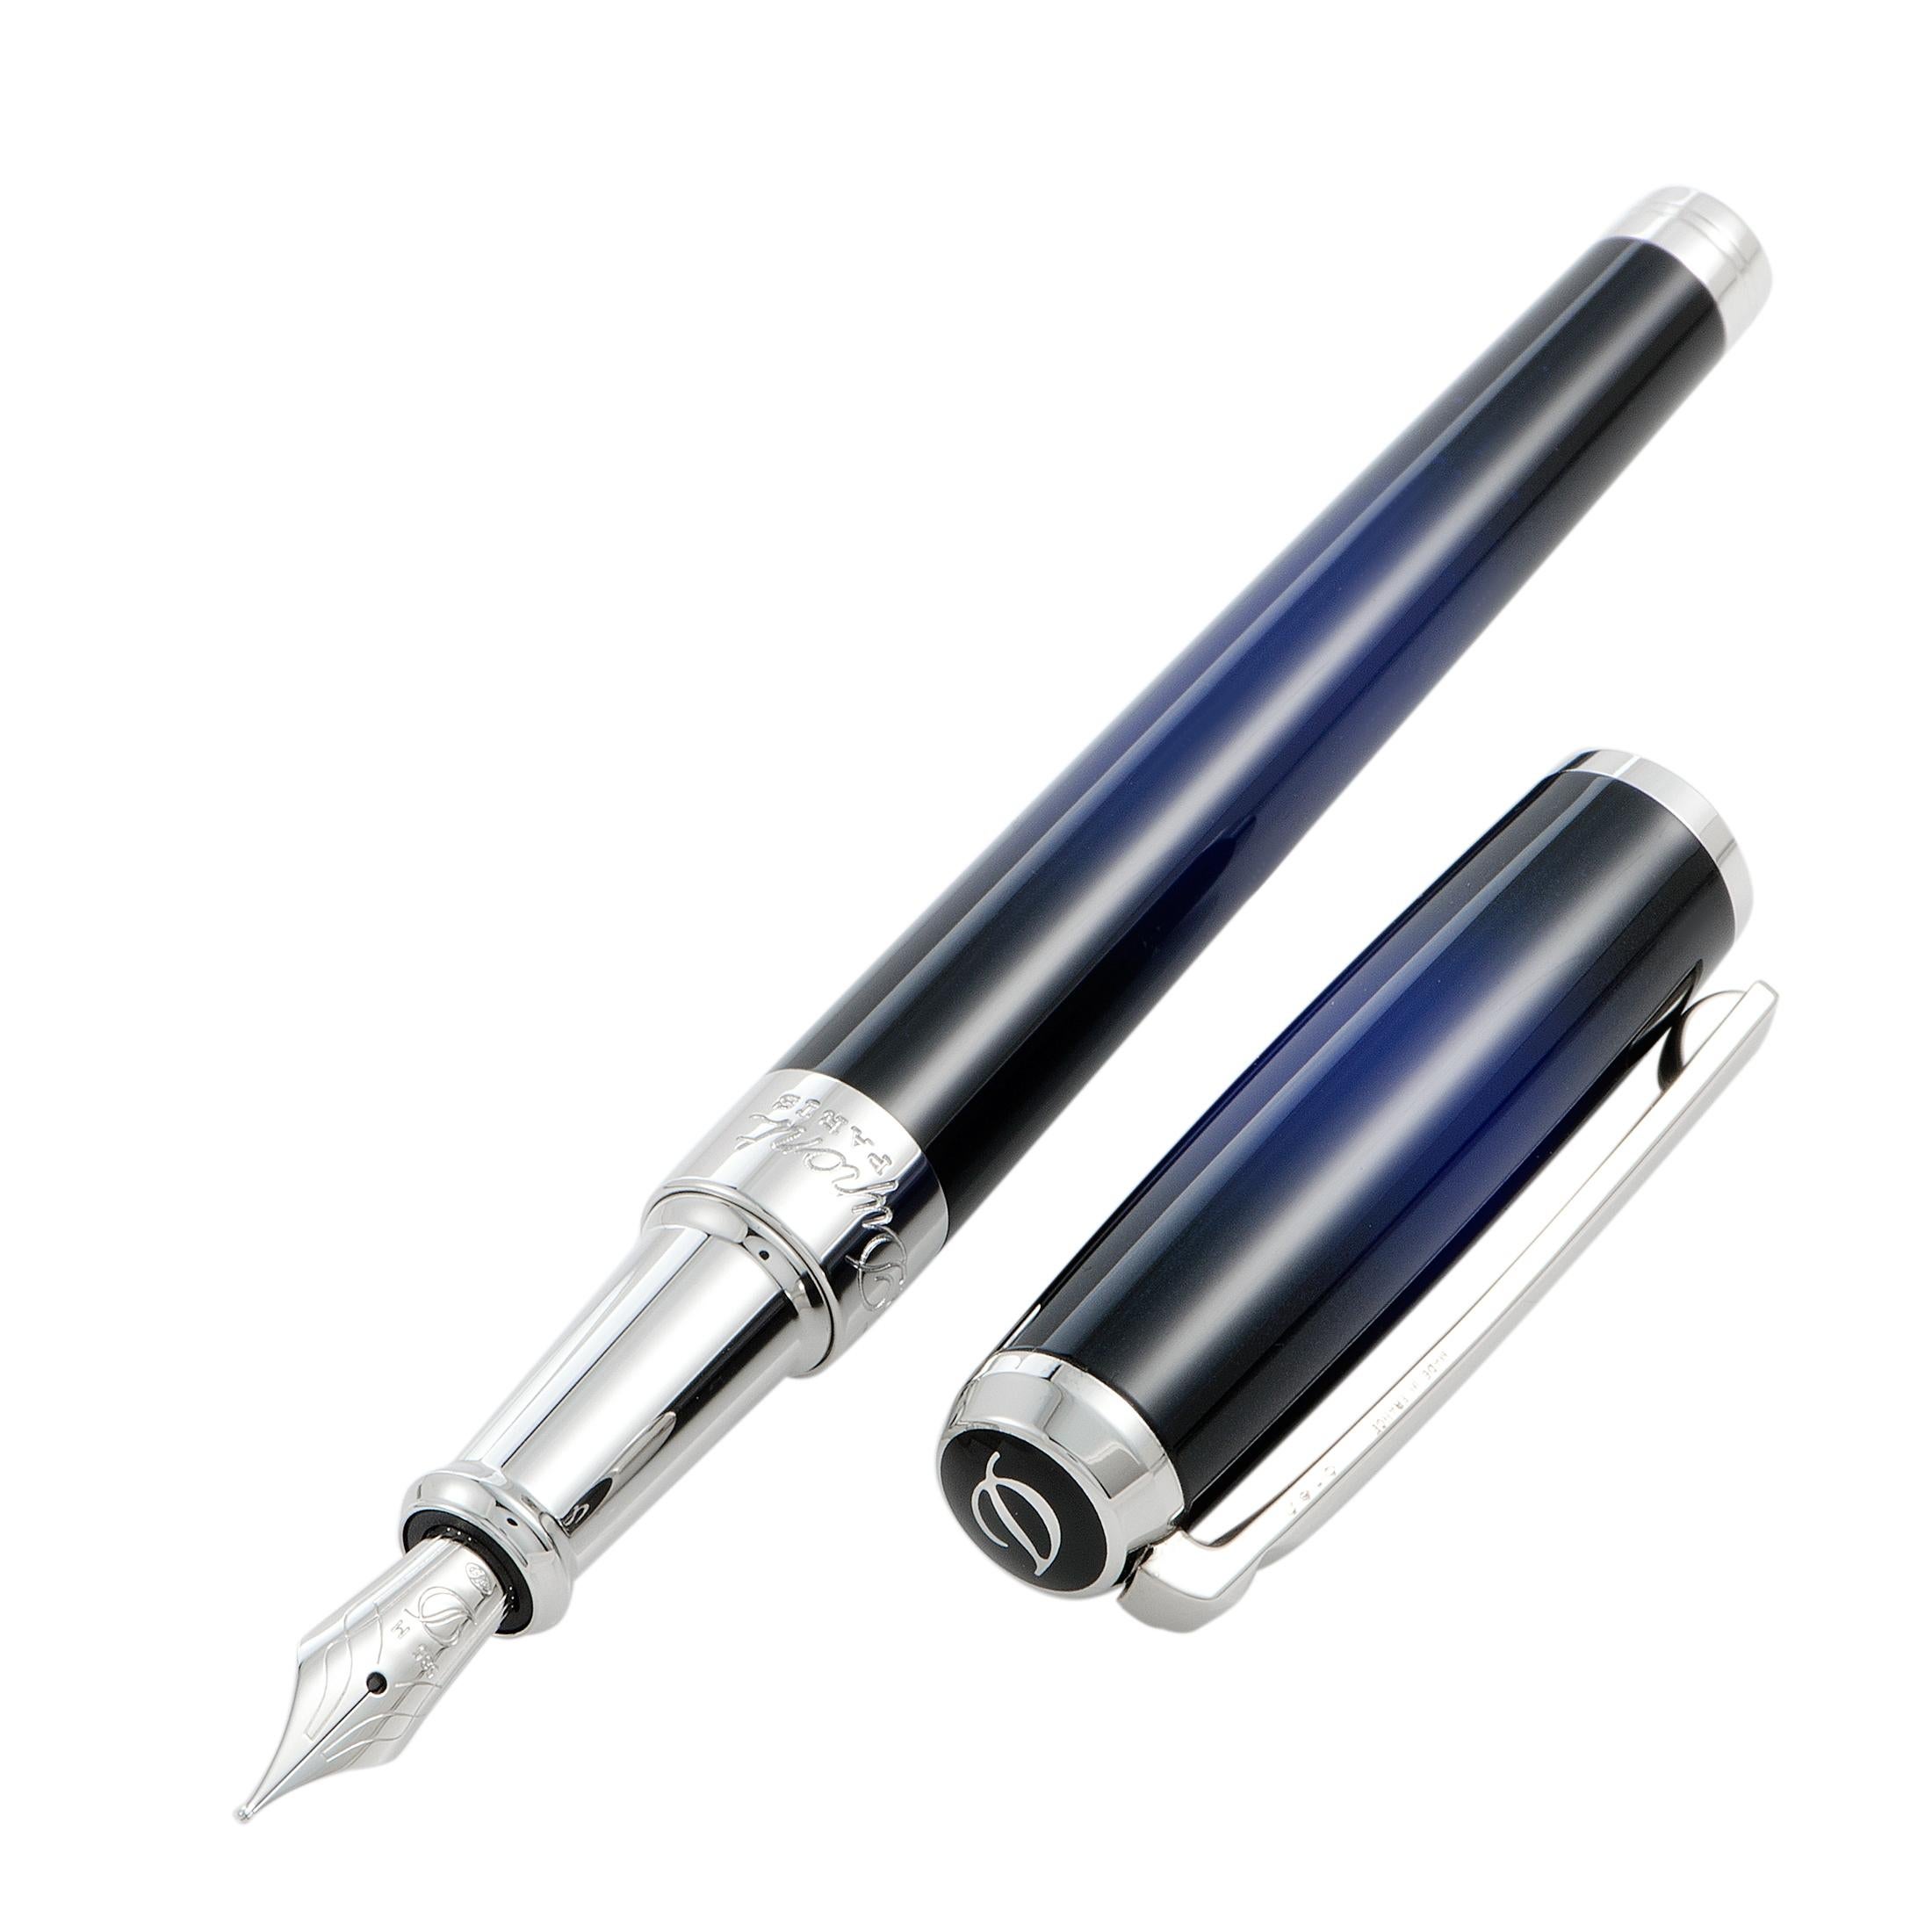 The intriguing allure of blue lacquer, combined with the elegant metallic sheen, gives an enticingly prestigious appeal to this exceptional fountain pen. The pen is beautifully designed by S.T. Dupont for the sublime “Line D” collection.